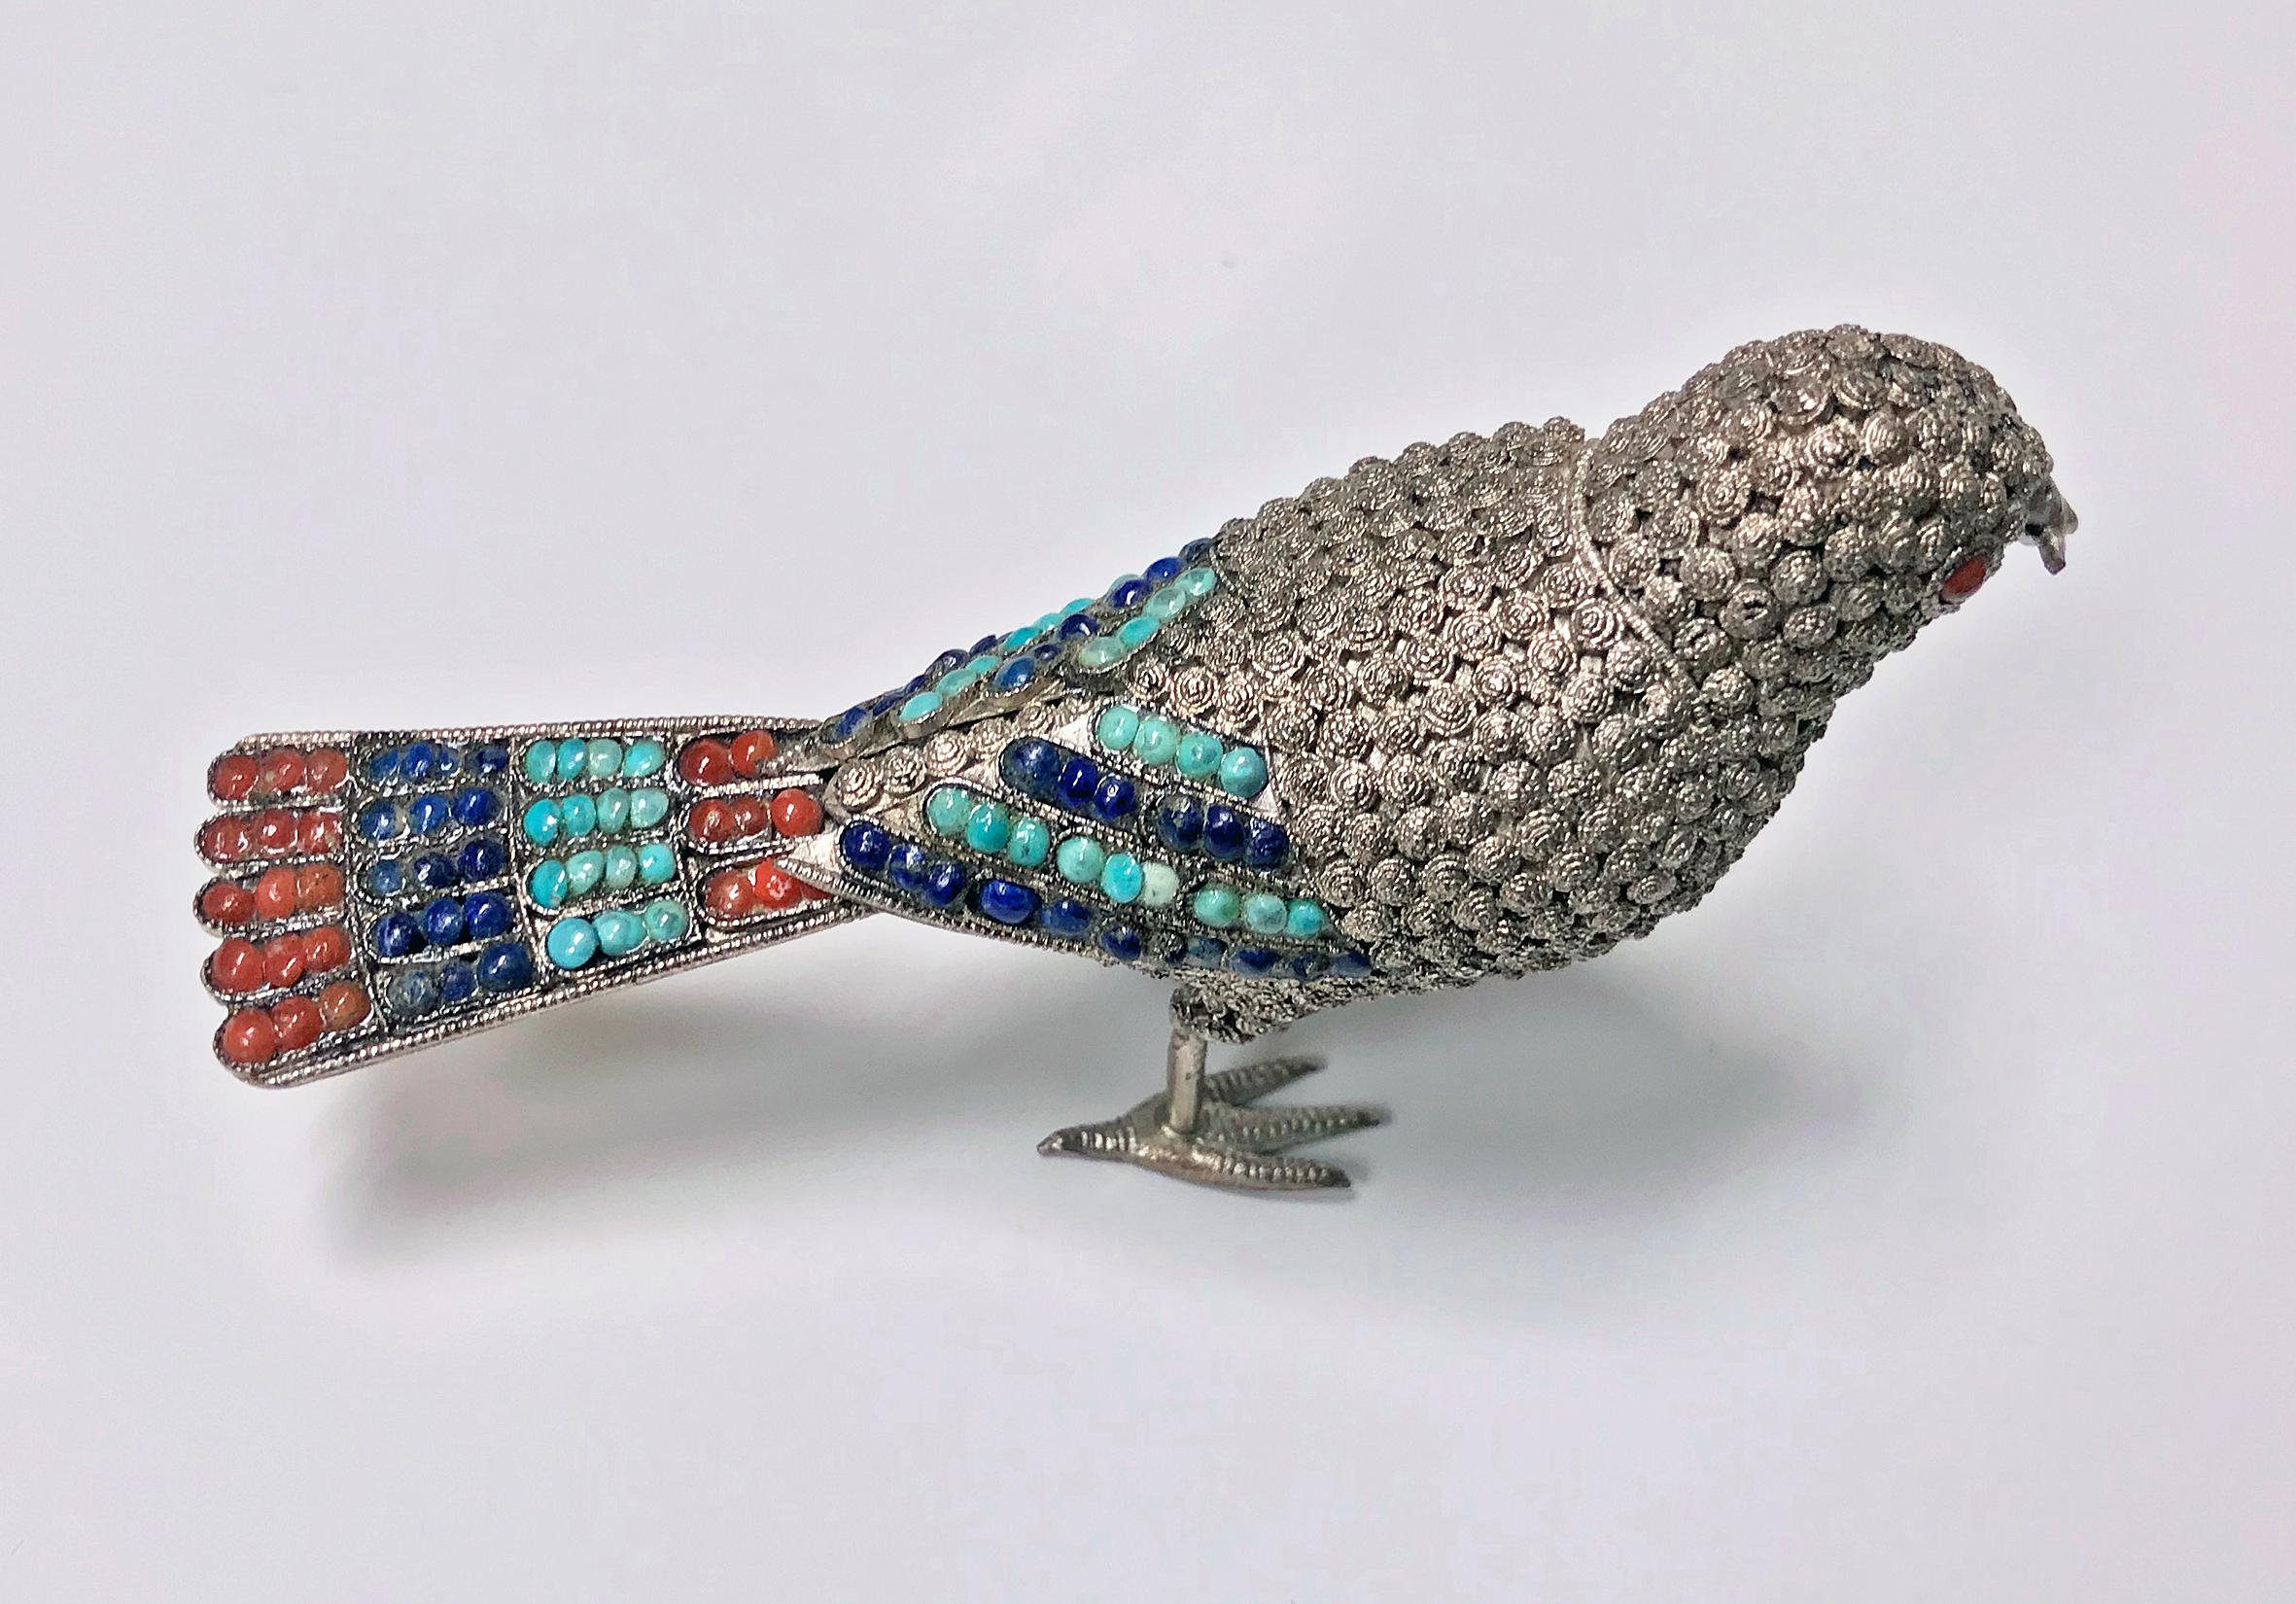 925 sterling silver and multi-color stone bird (possibly a fantail), probably Chinese, circa 1950. The bird with fish in mouth is highly detailed with a fine silver wire work filigree body, inset with stones. The silver tail, wings and eyes set with